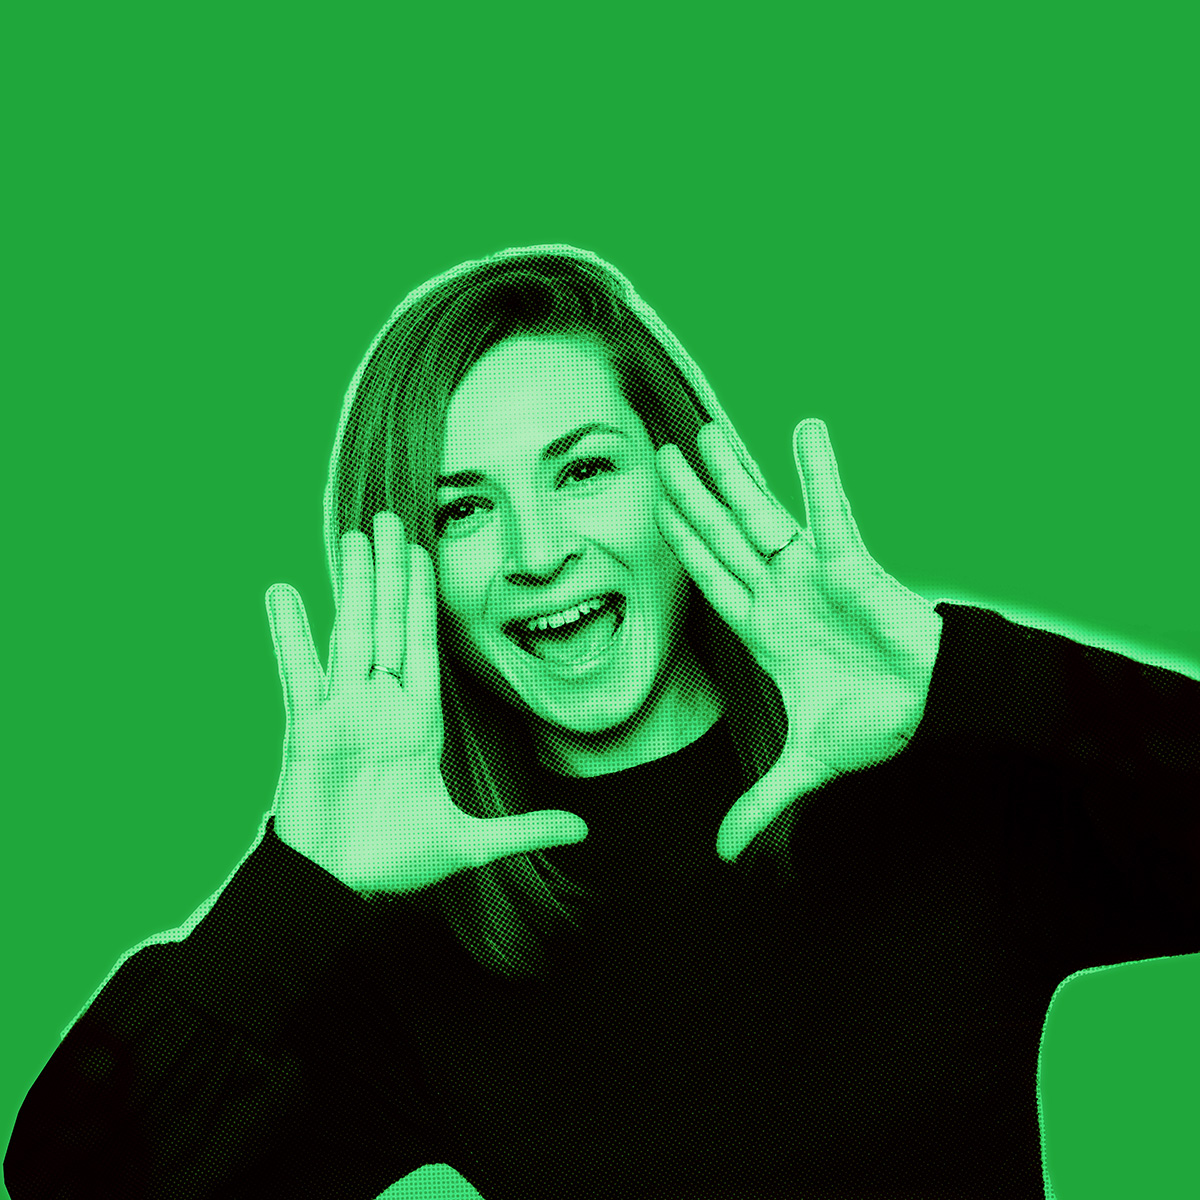 Green-filtered picture of woman smiling and holding both hands to the side of her face